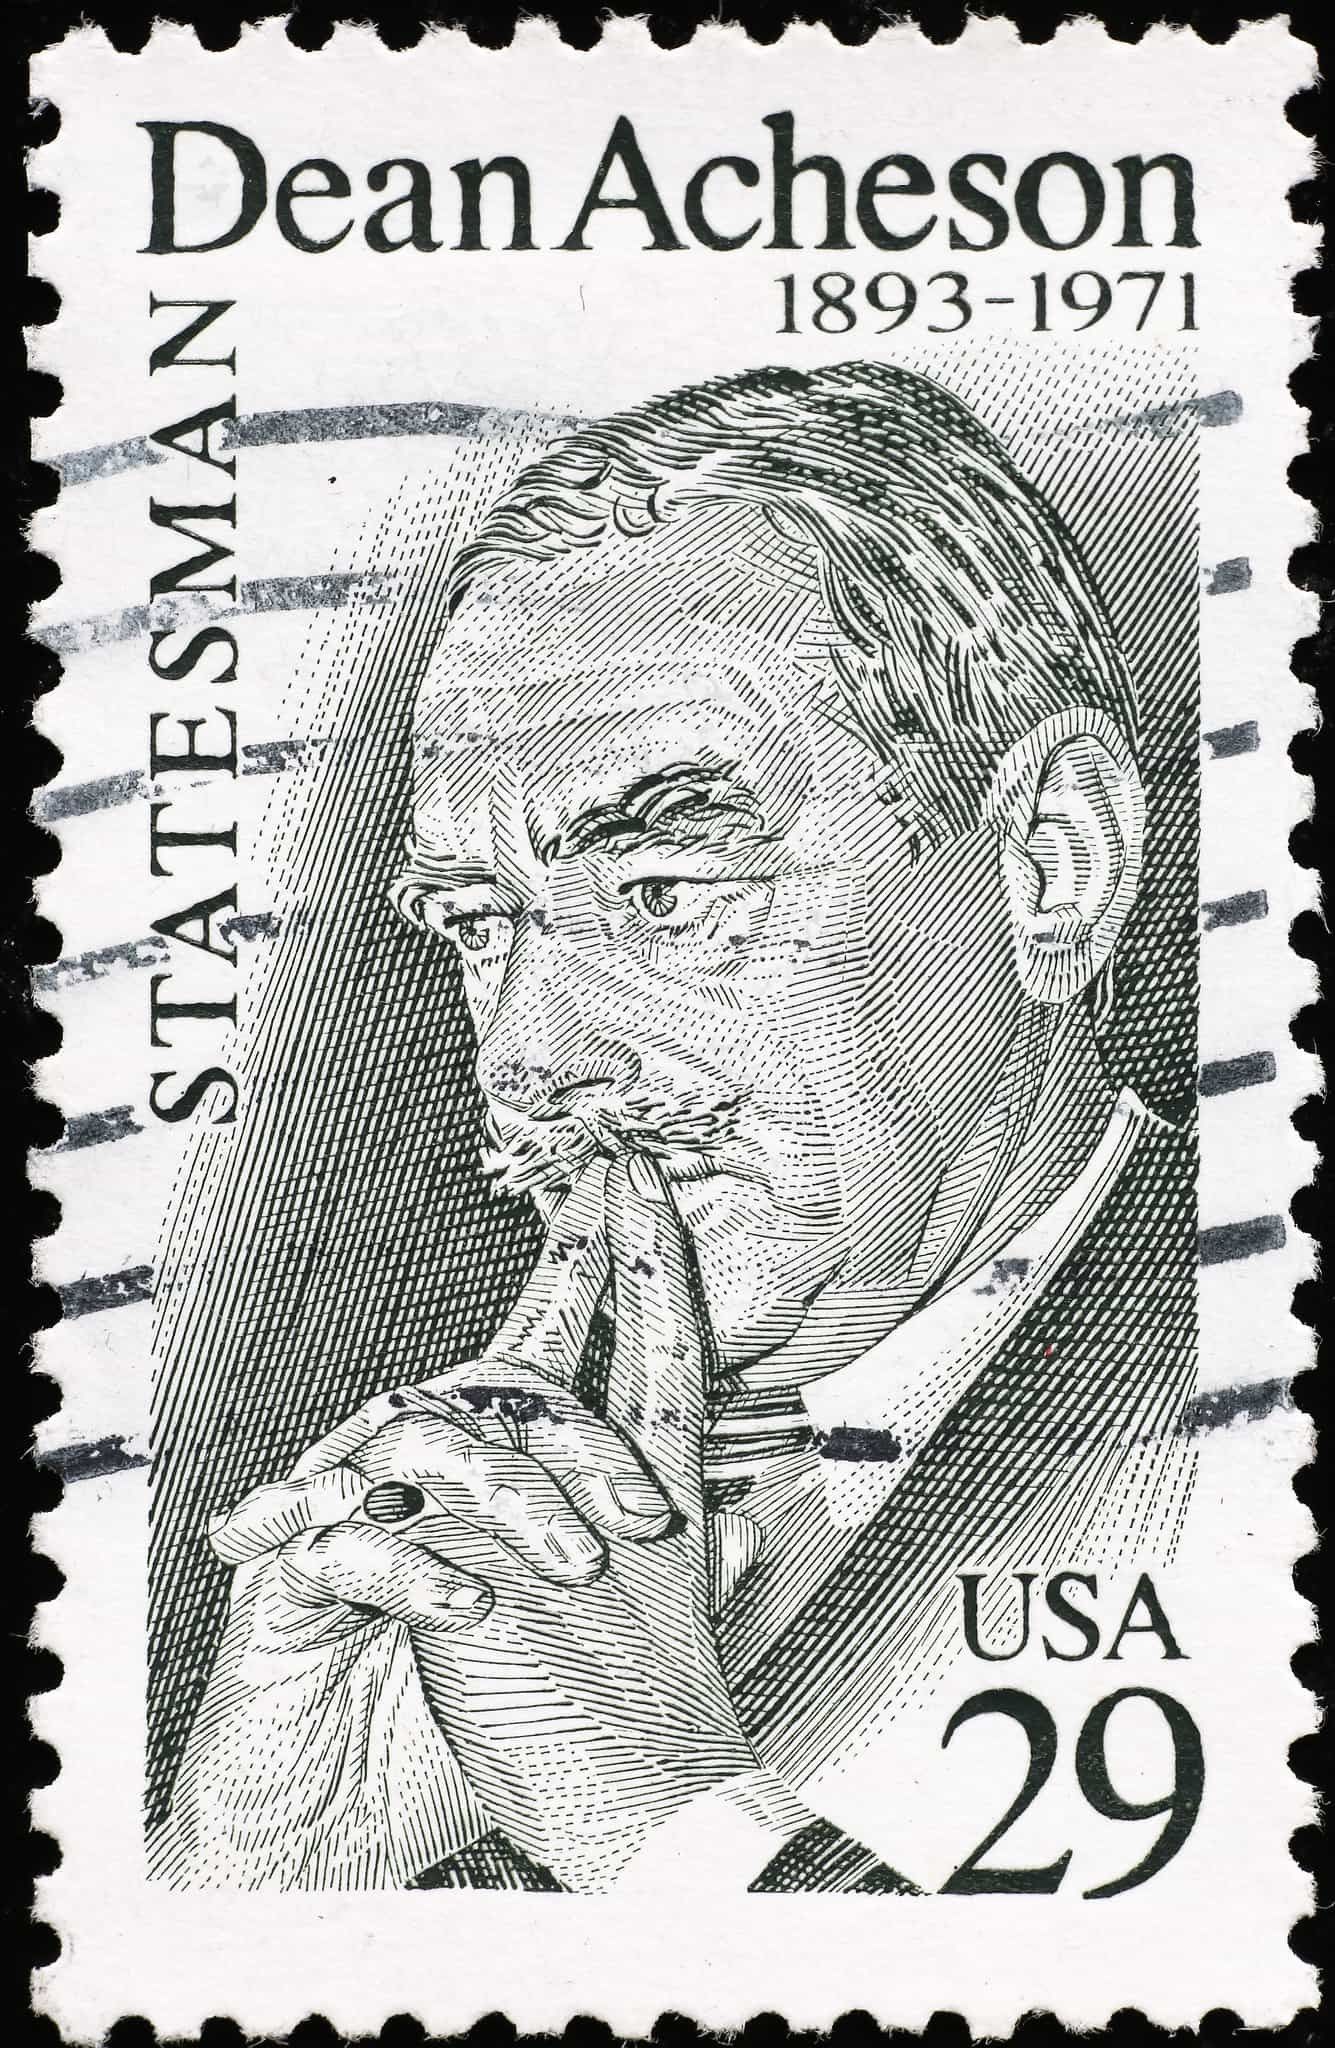 Read some of the amazing Dean Acheson quotes here at Kidadl.